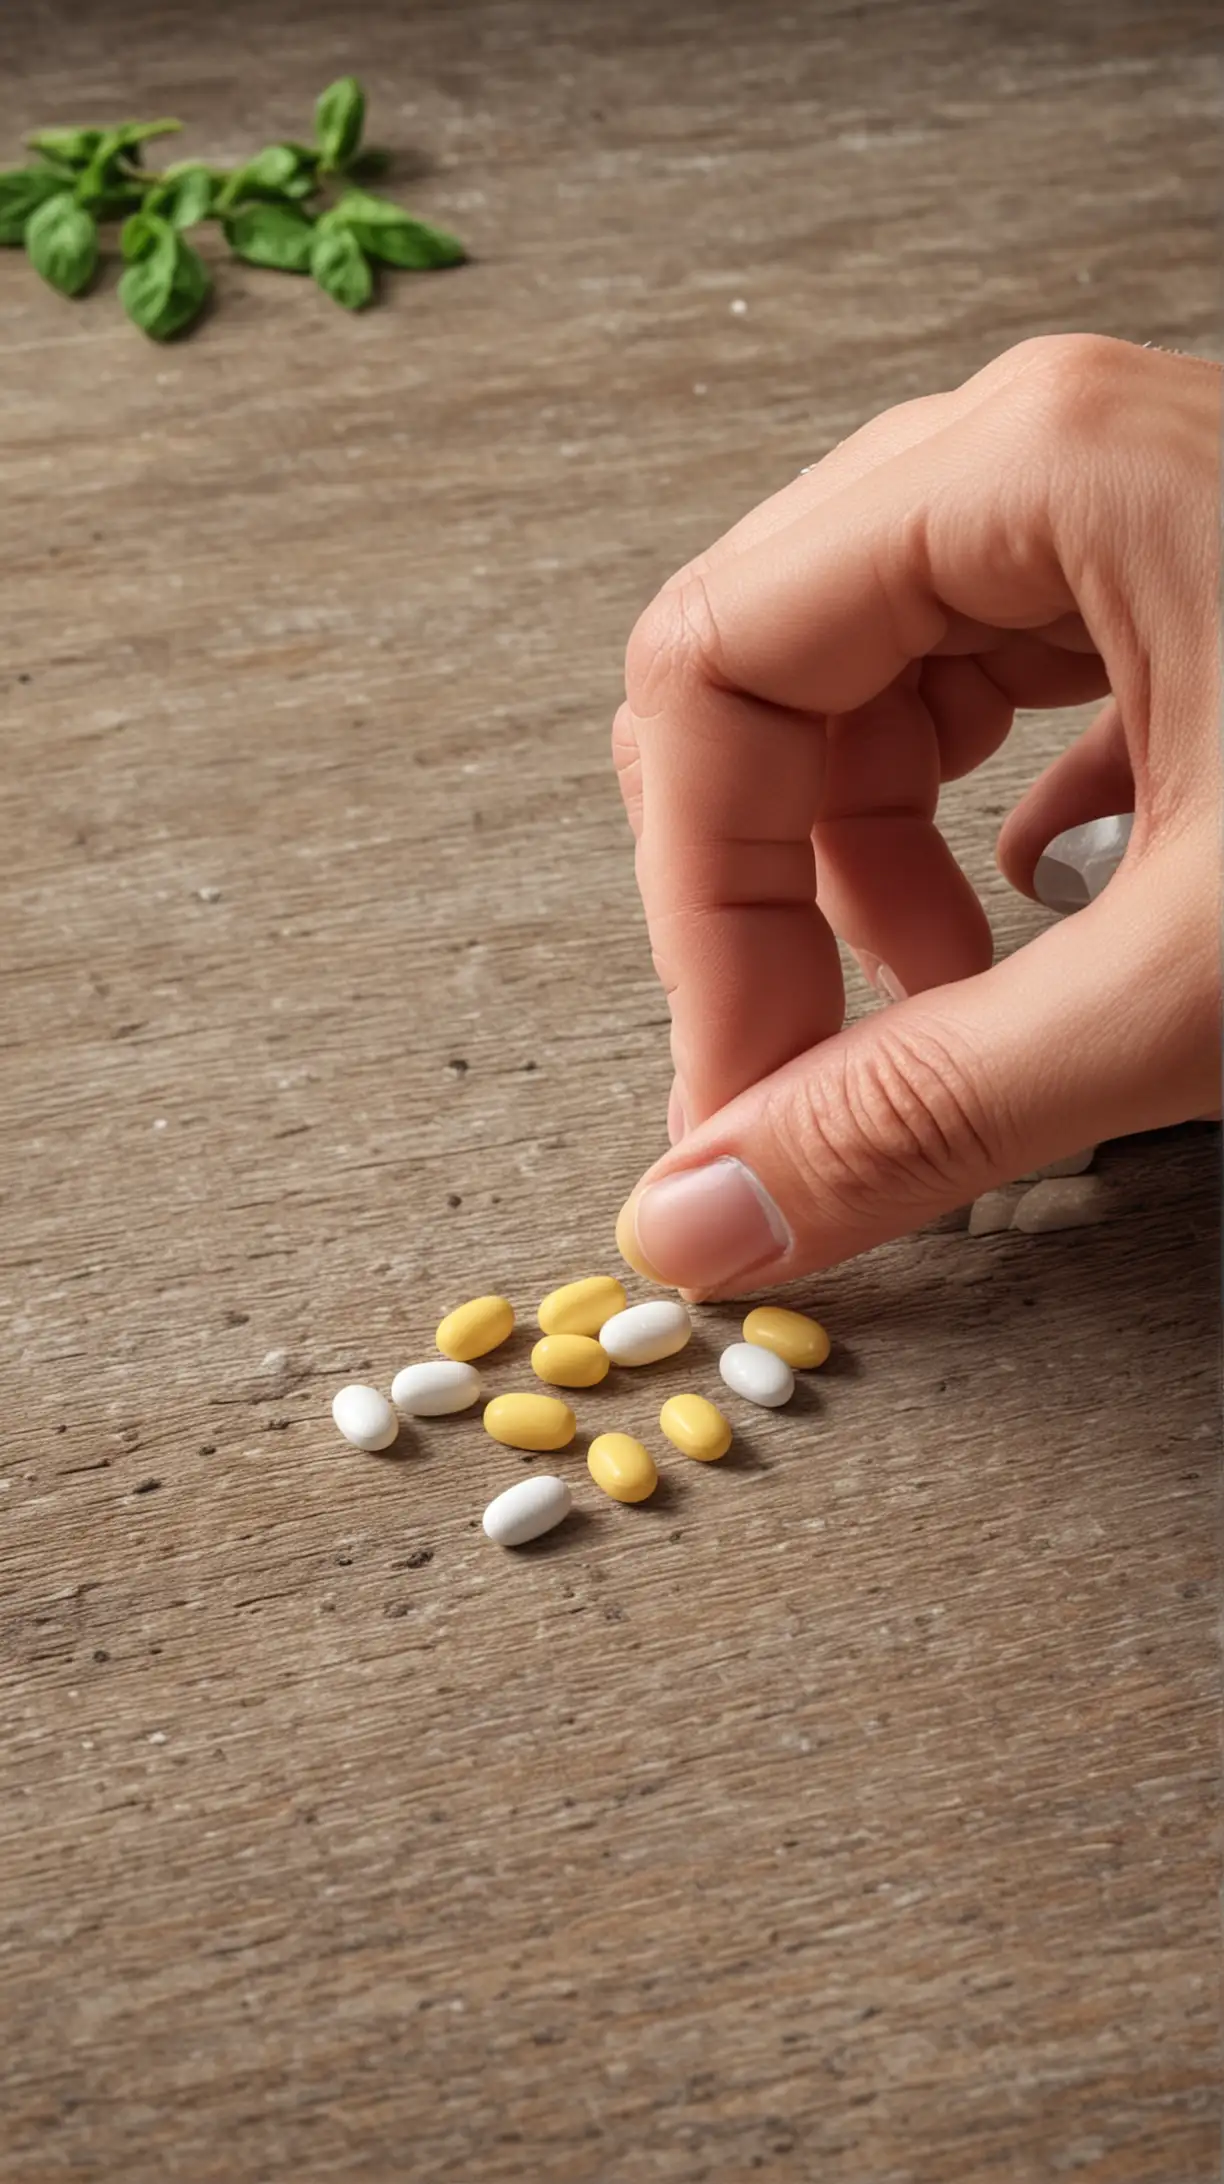 hand picking a luteolin pill from a table, 4k, HDR, hyper-realistic